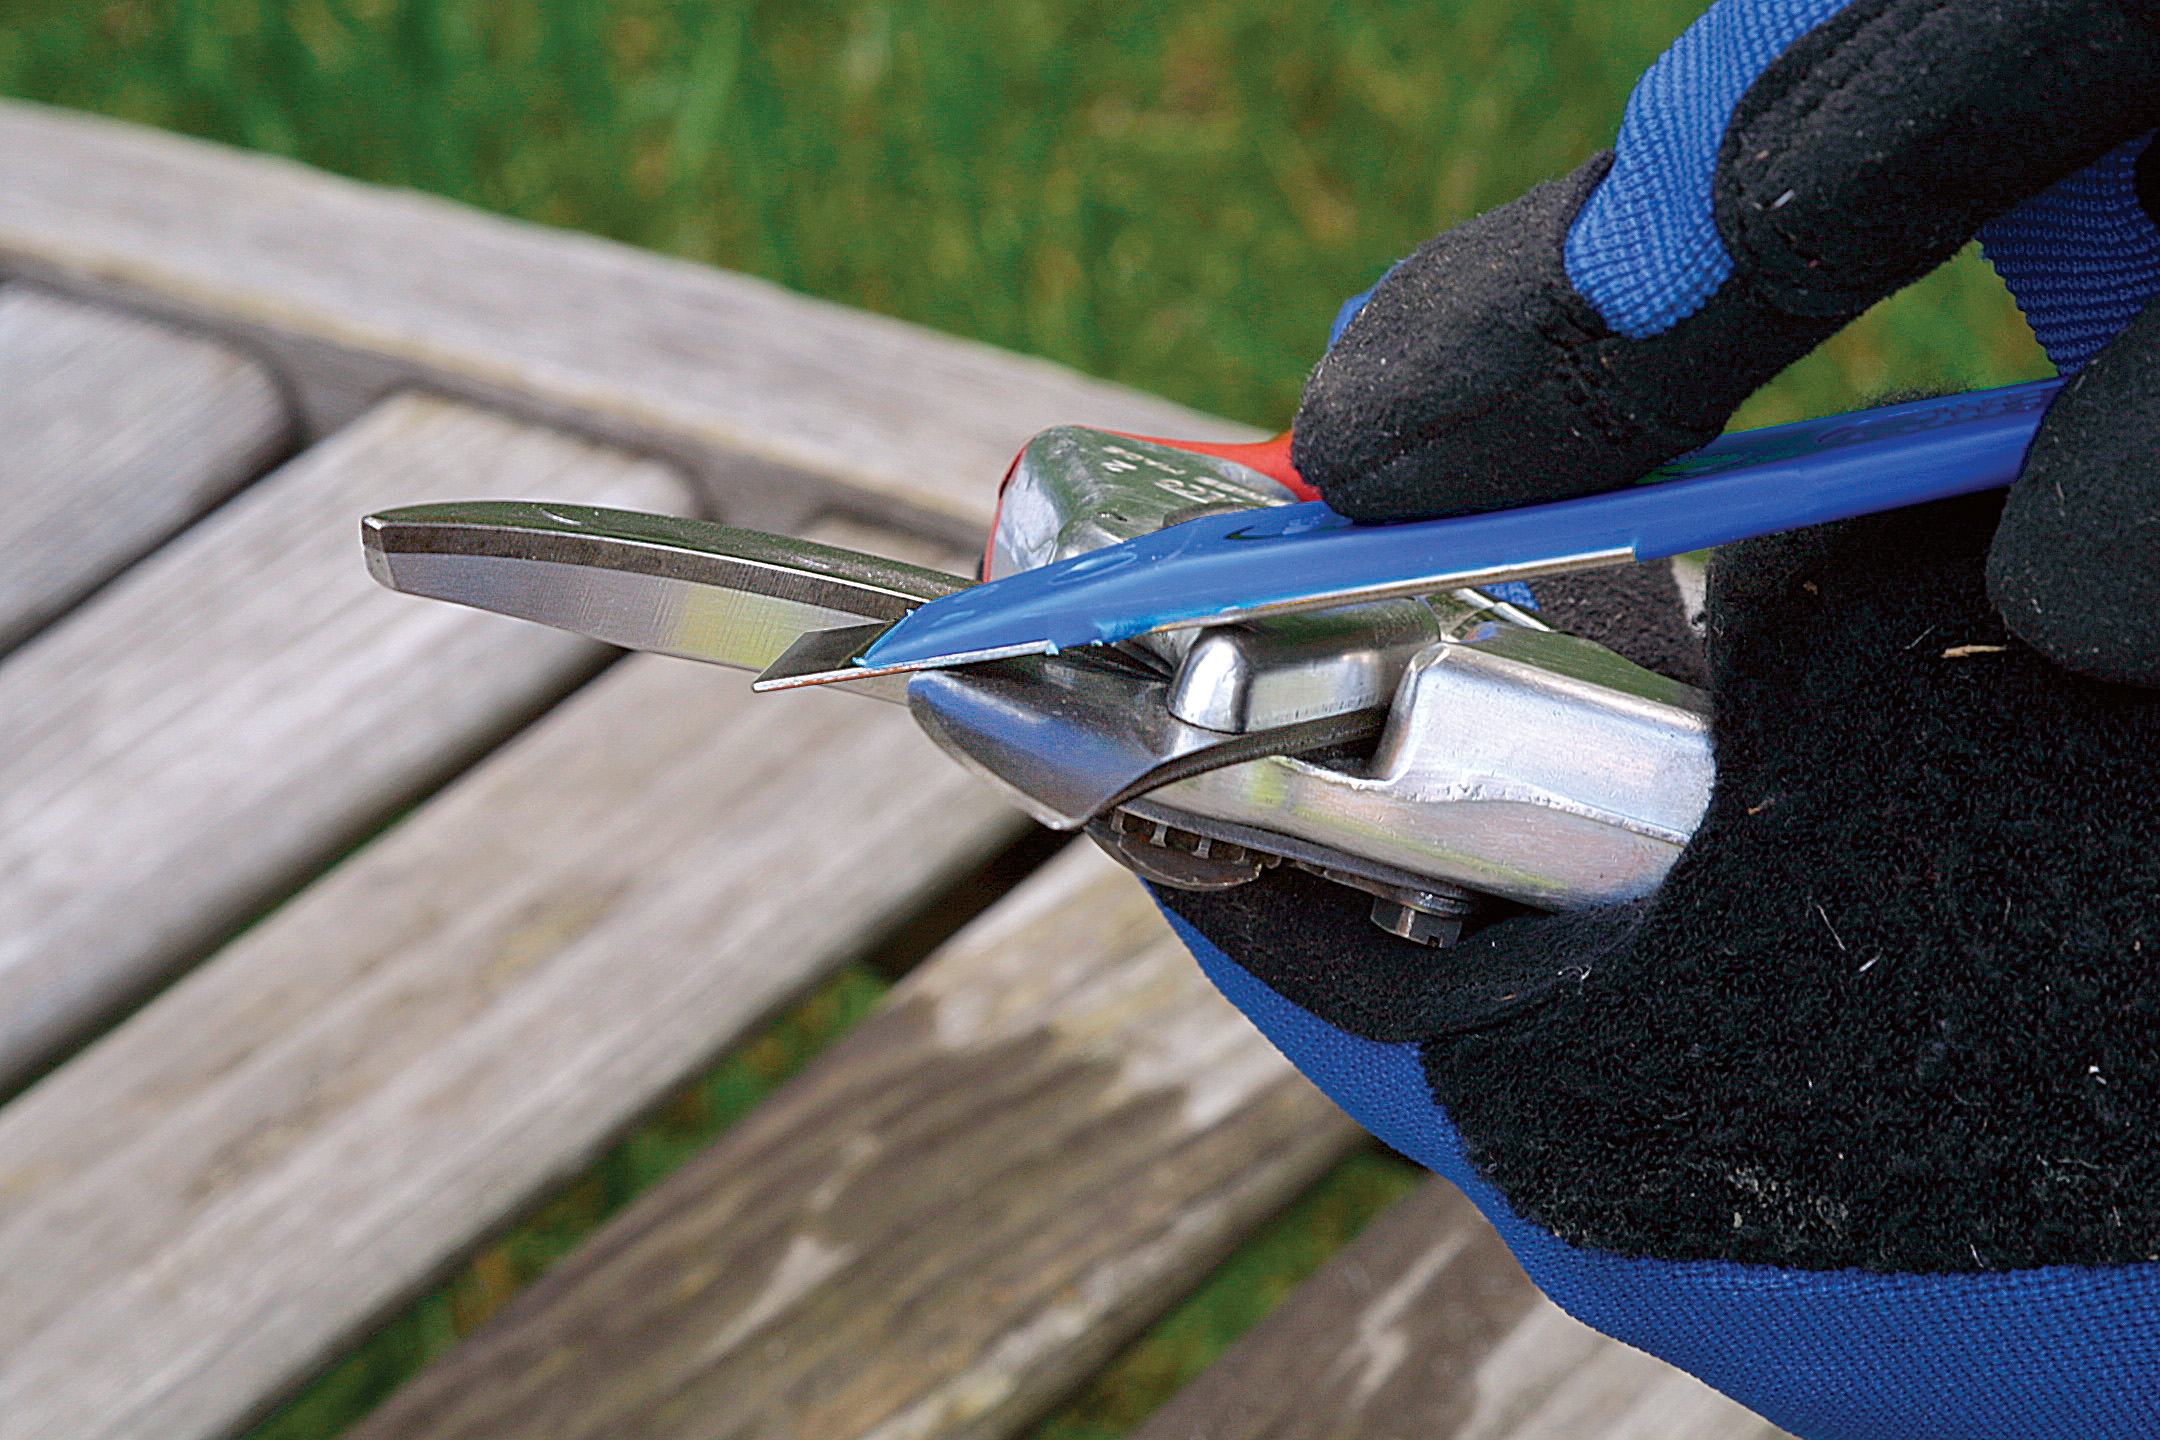 How to Clean and Sharpen Hand Pruners